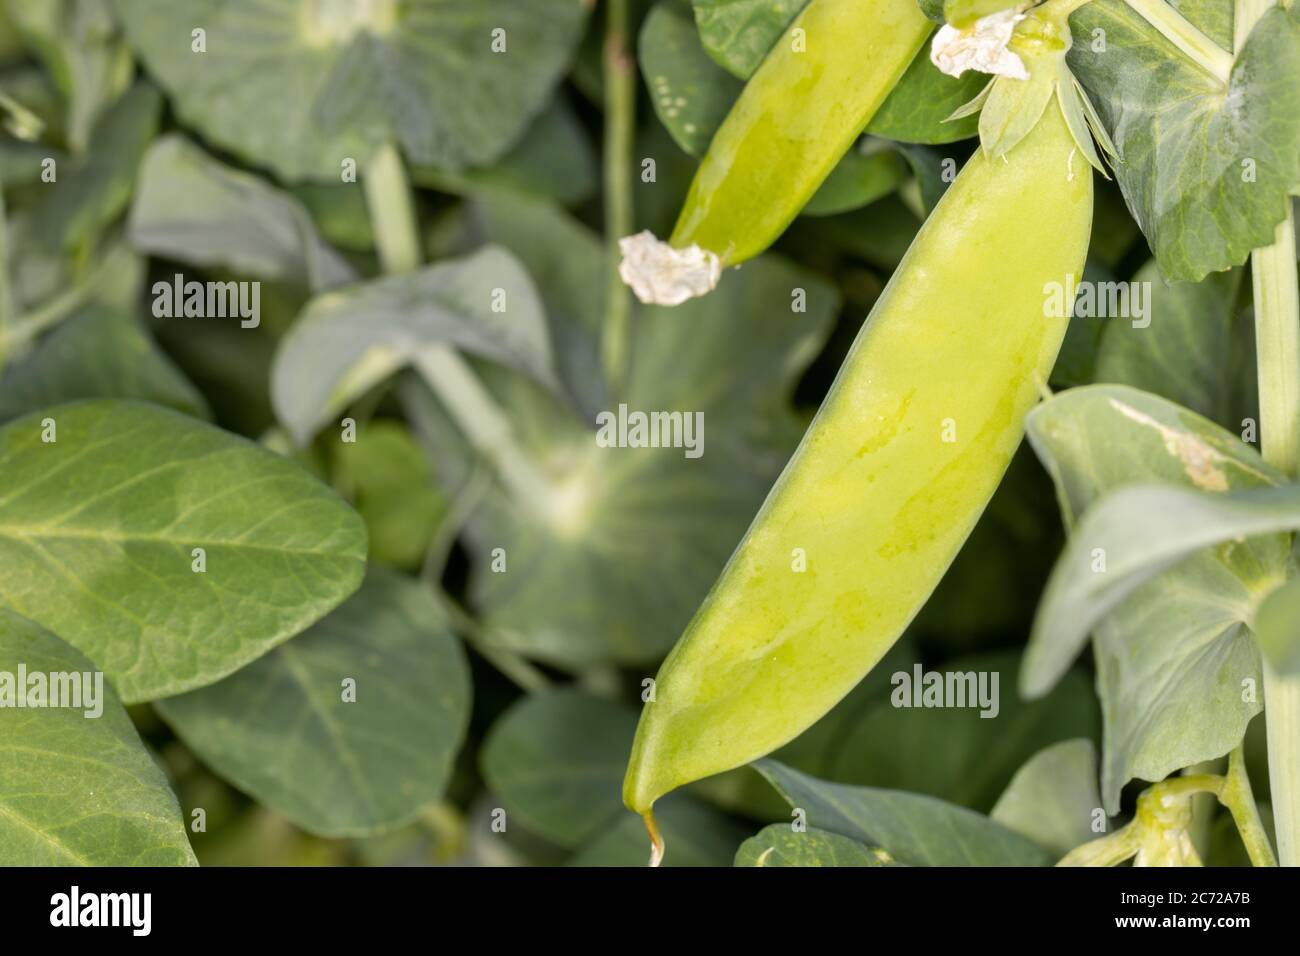 Snow peas growing on the vine in home garden setting Stock Photo